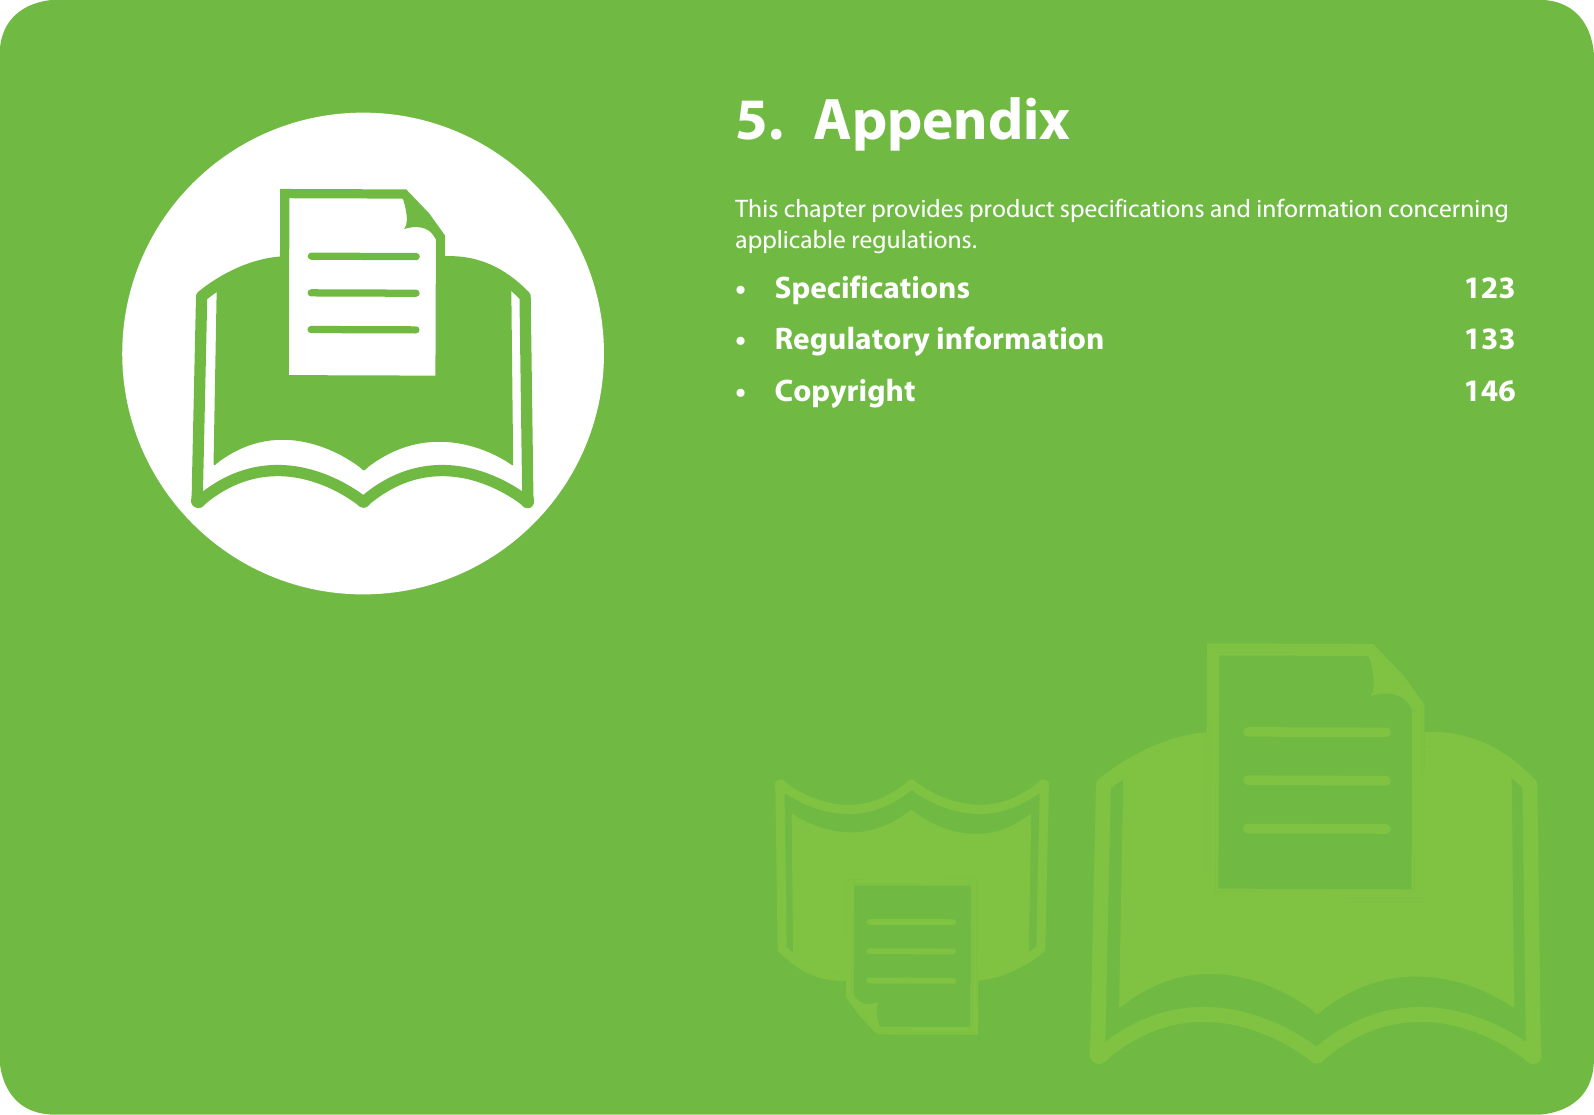 5. AppendixThis chapter provides product specifications and information concerning applicable regulations.• Specifications 123• Regulatory information 133• Copyright 146